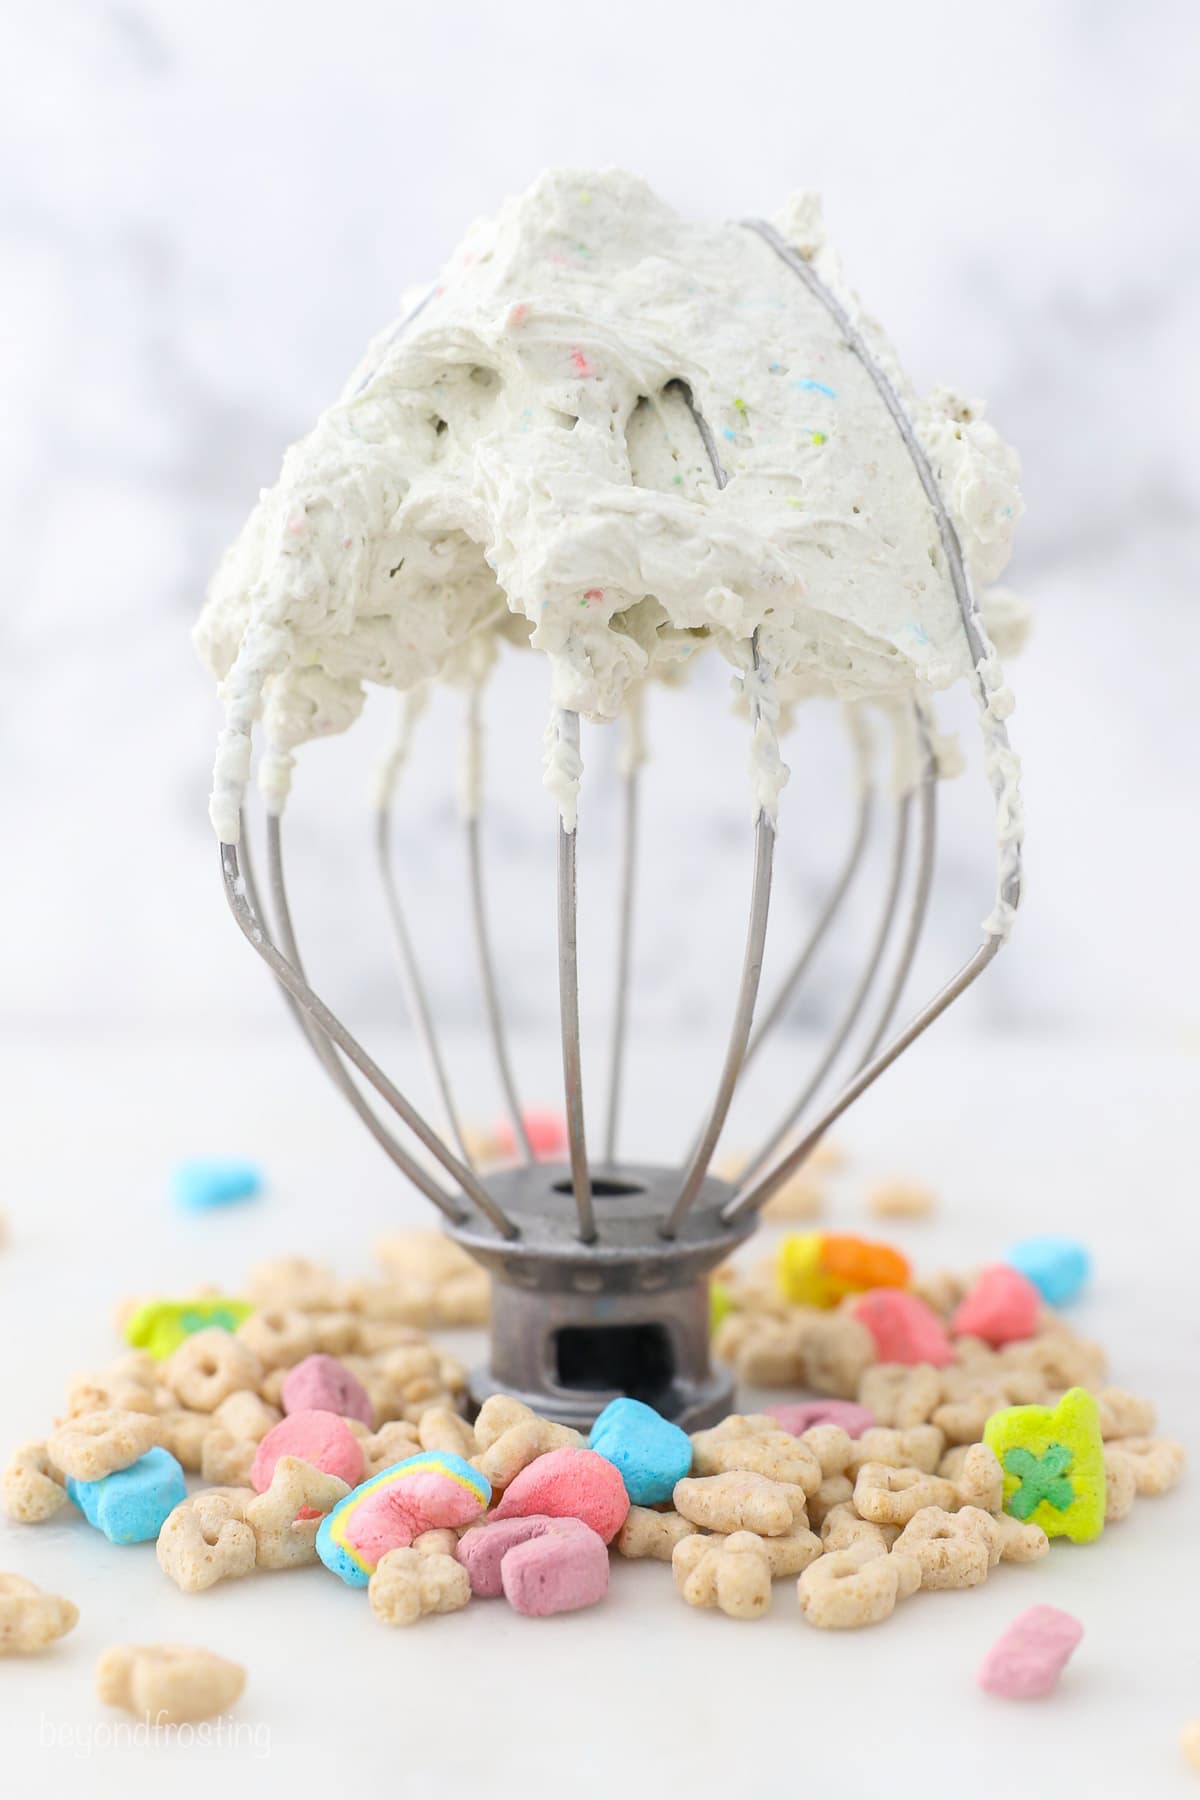 A stand mixer attachment topped with cereal milk whipped cream standing upright on a countertop, surrounded by Lucky Charms cereal.